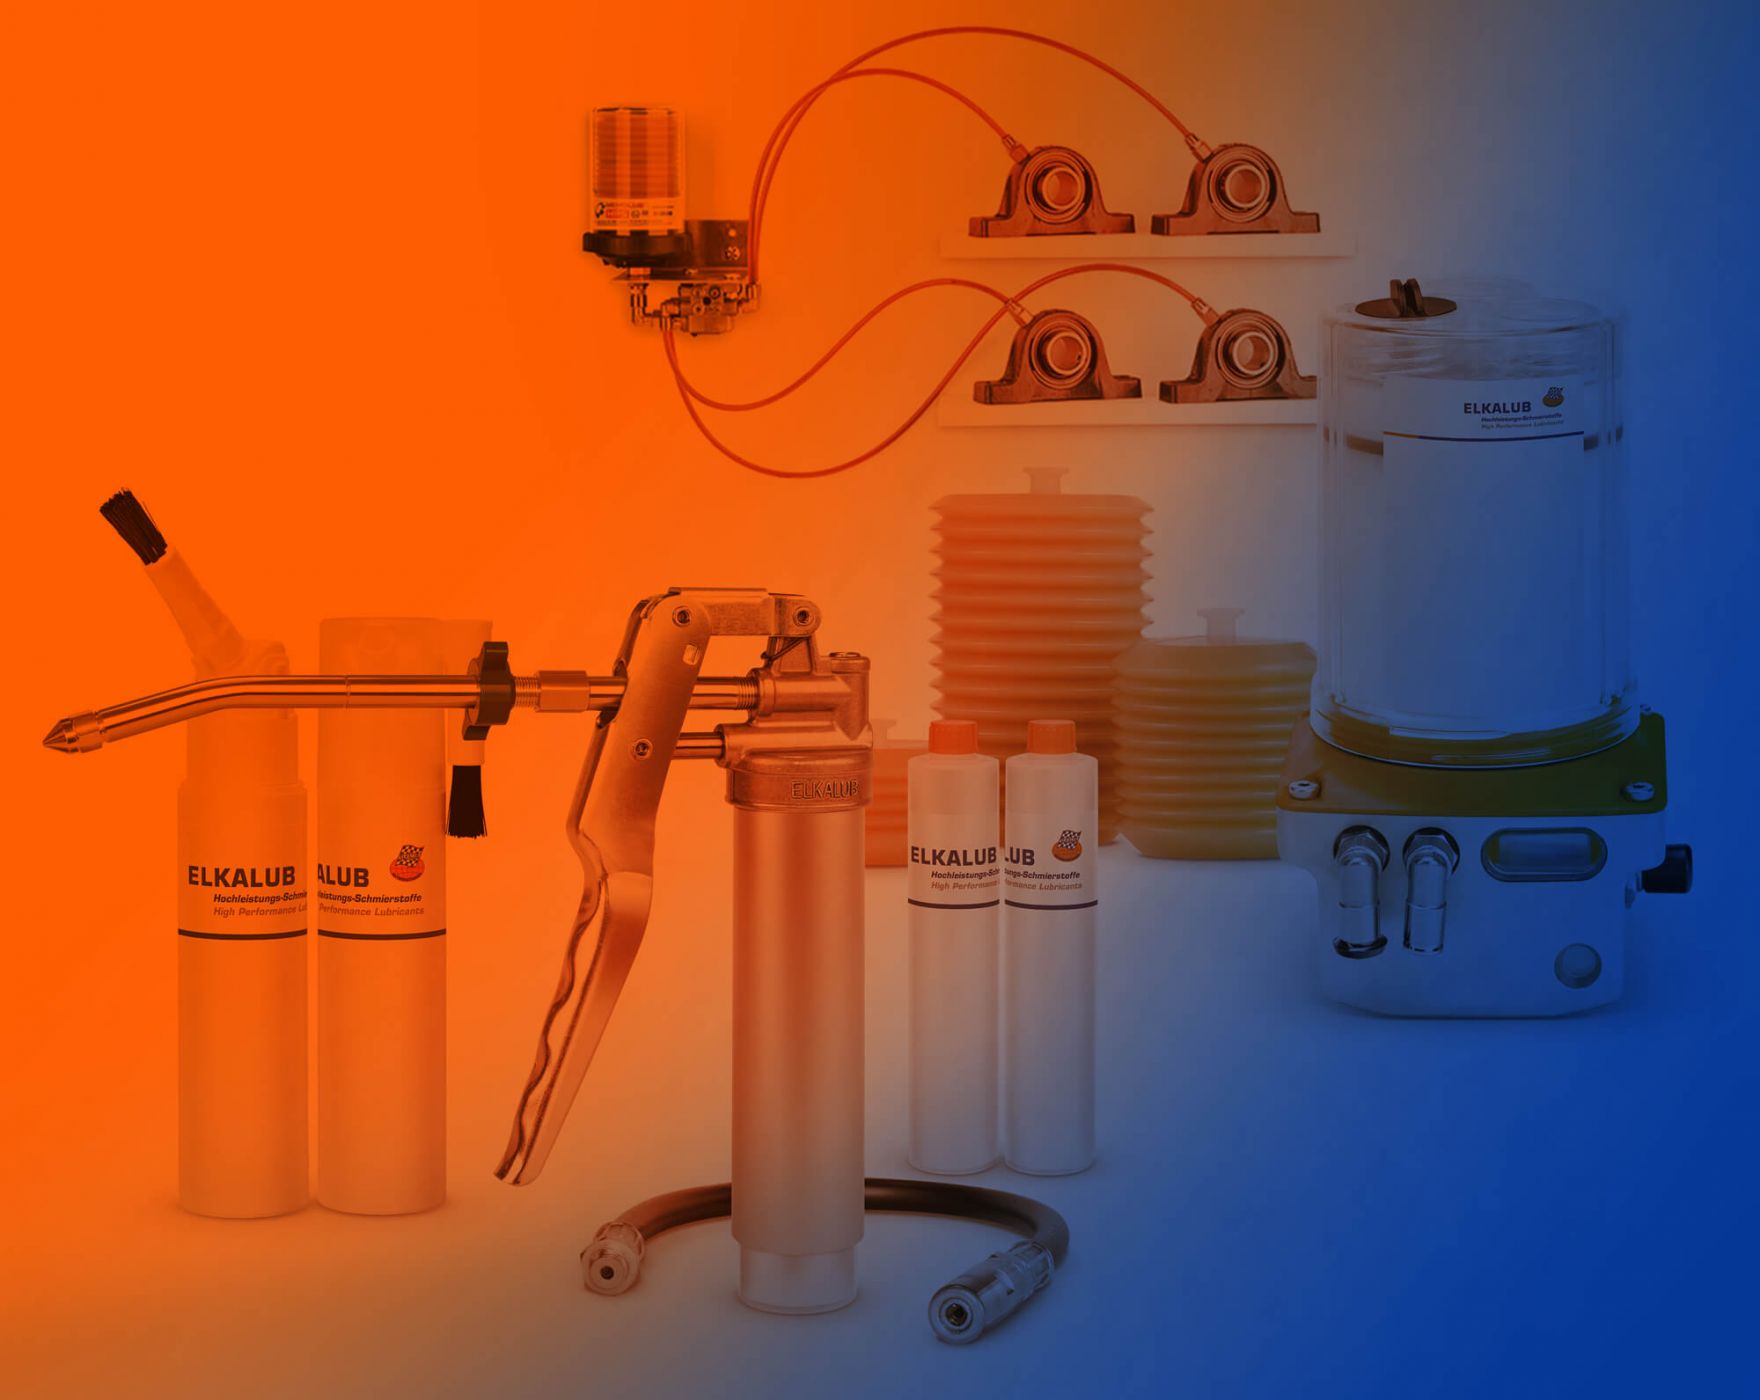 A selection of ELKALUB containers for lubricants. In the foreground is an MCP 100 one handed grease gun with two cartridges and interchangeable hose. Behind it on the left are brush cans. Automatic lubricant dispensers and cartridges are shown in the back